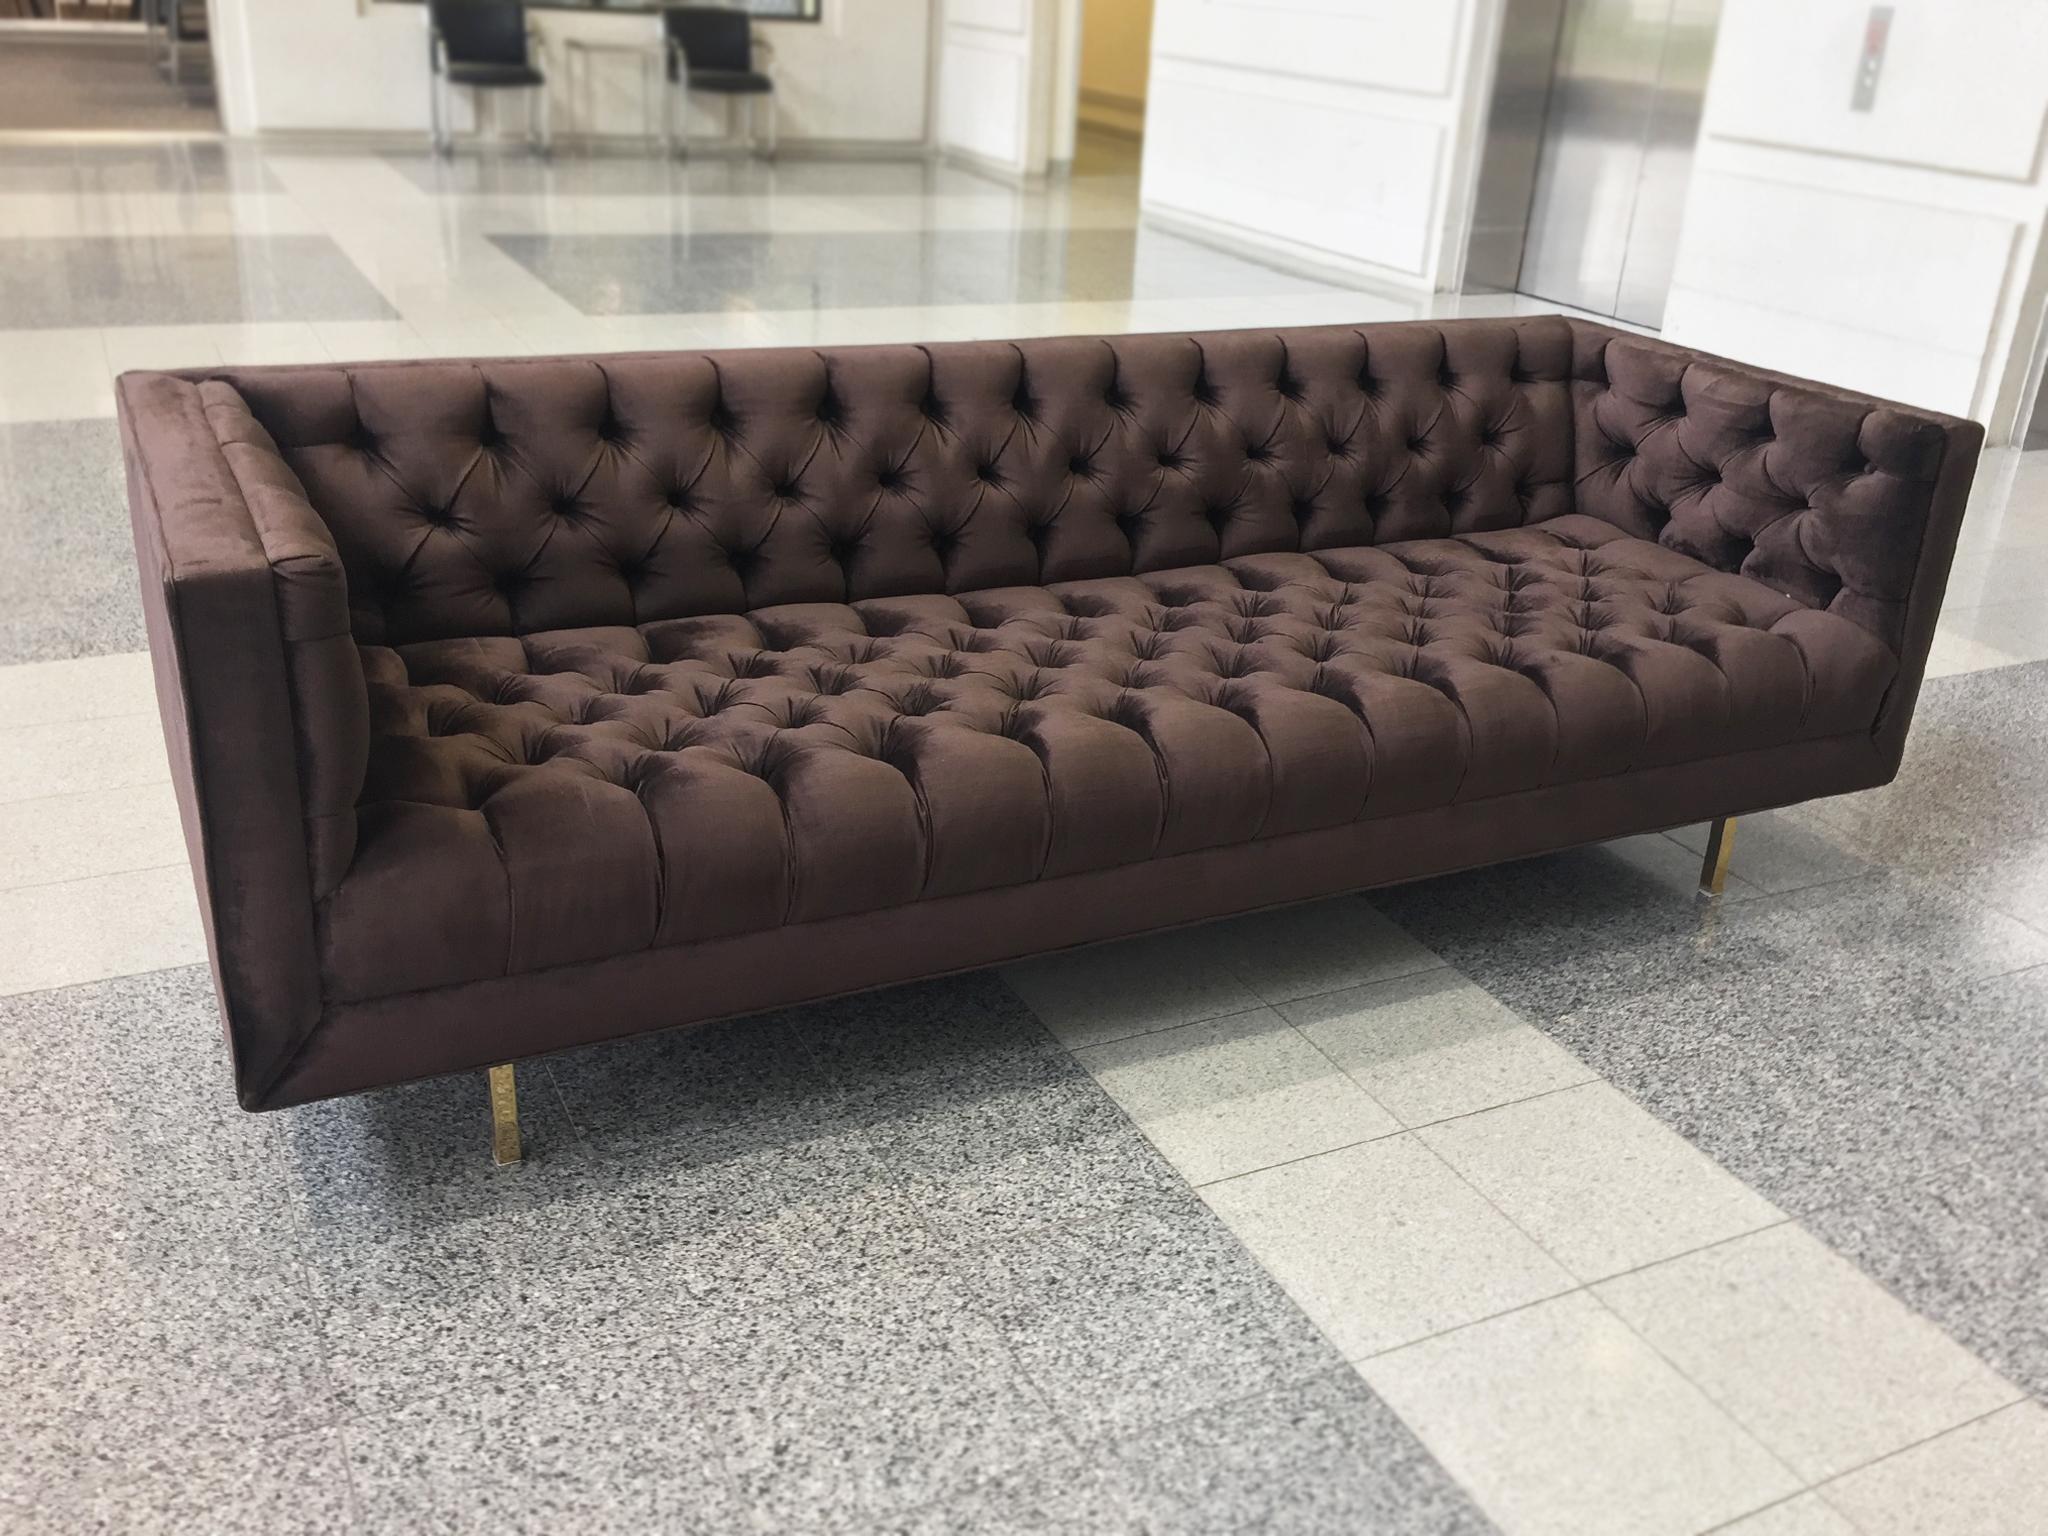 An elegant vintage Chesterfield sofa in the chic modern style of Milo Baughman. The sofa is upholstered in a plum-hued velvet. Its interior seat, backrest, and arms are button-tufted, while its legs are a complementary gold chrome. This sofa's